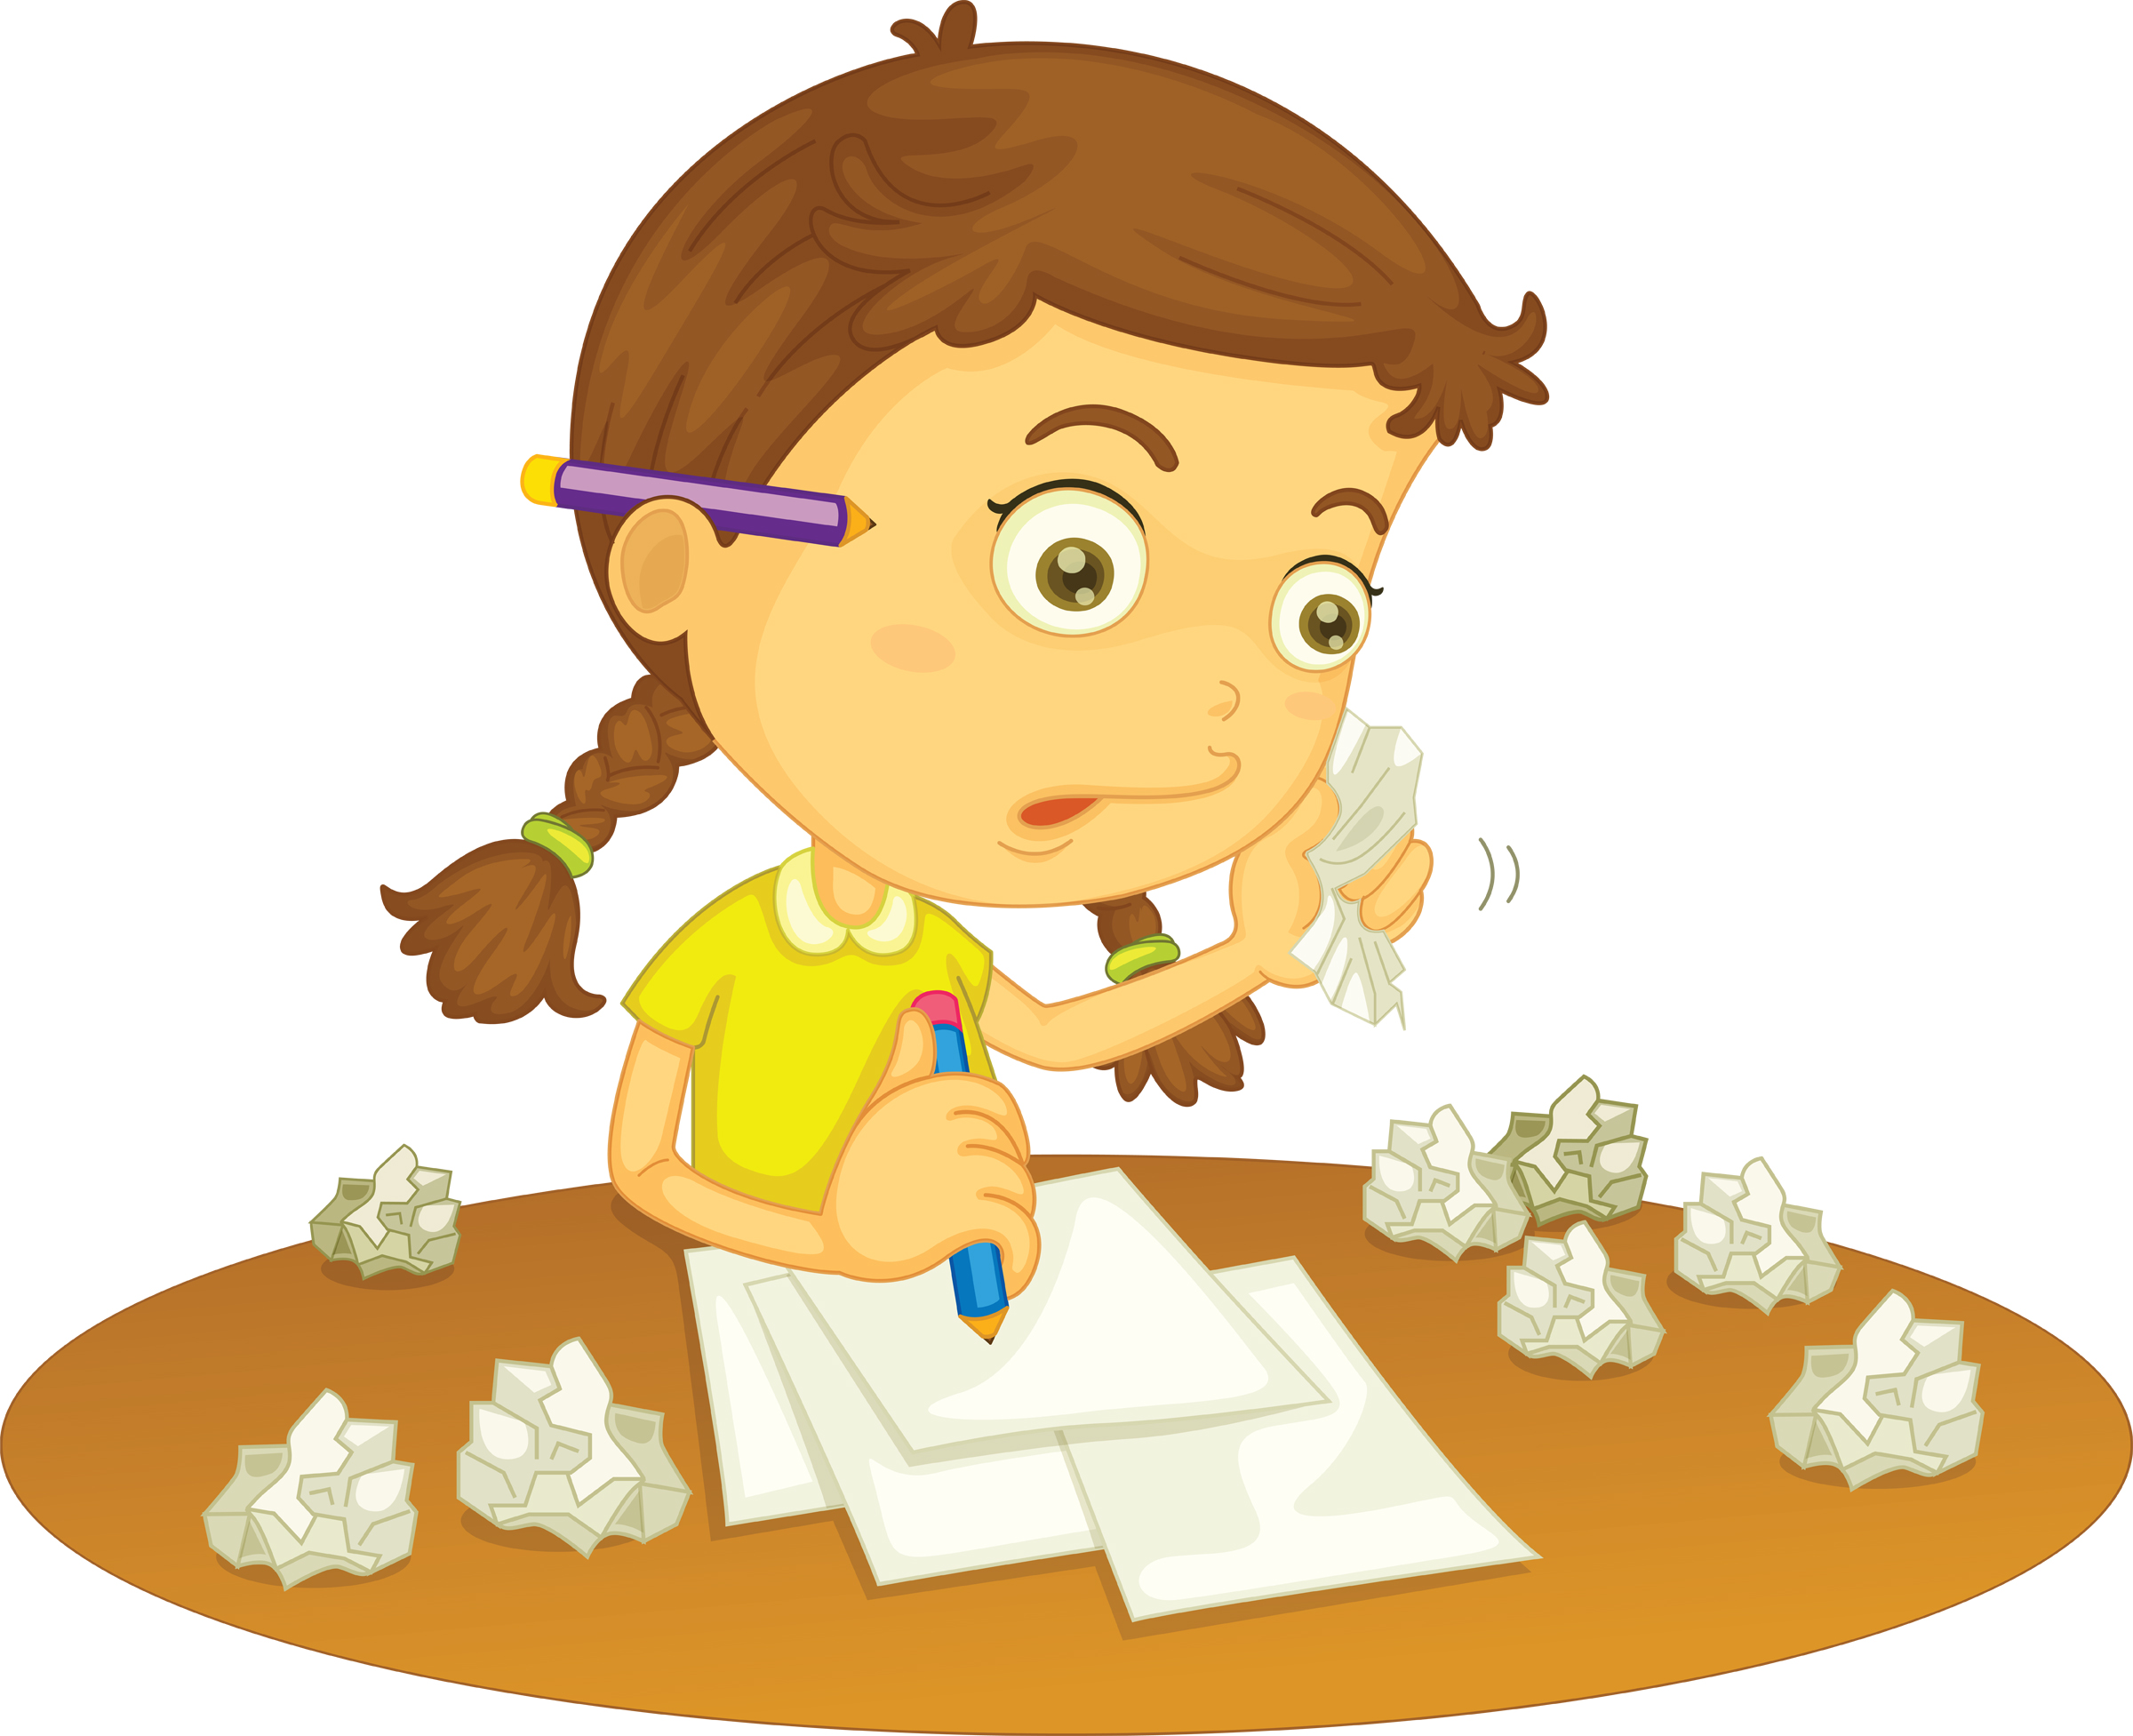 Clip Arts Related To : student doing homework clipart. view all Writing Stu...